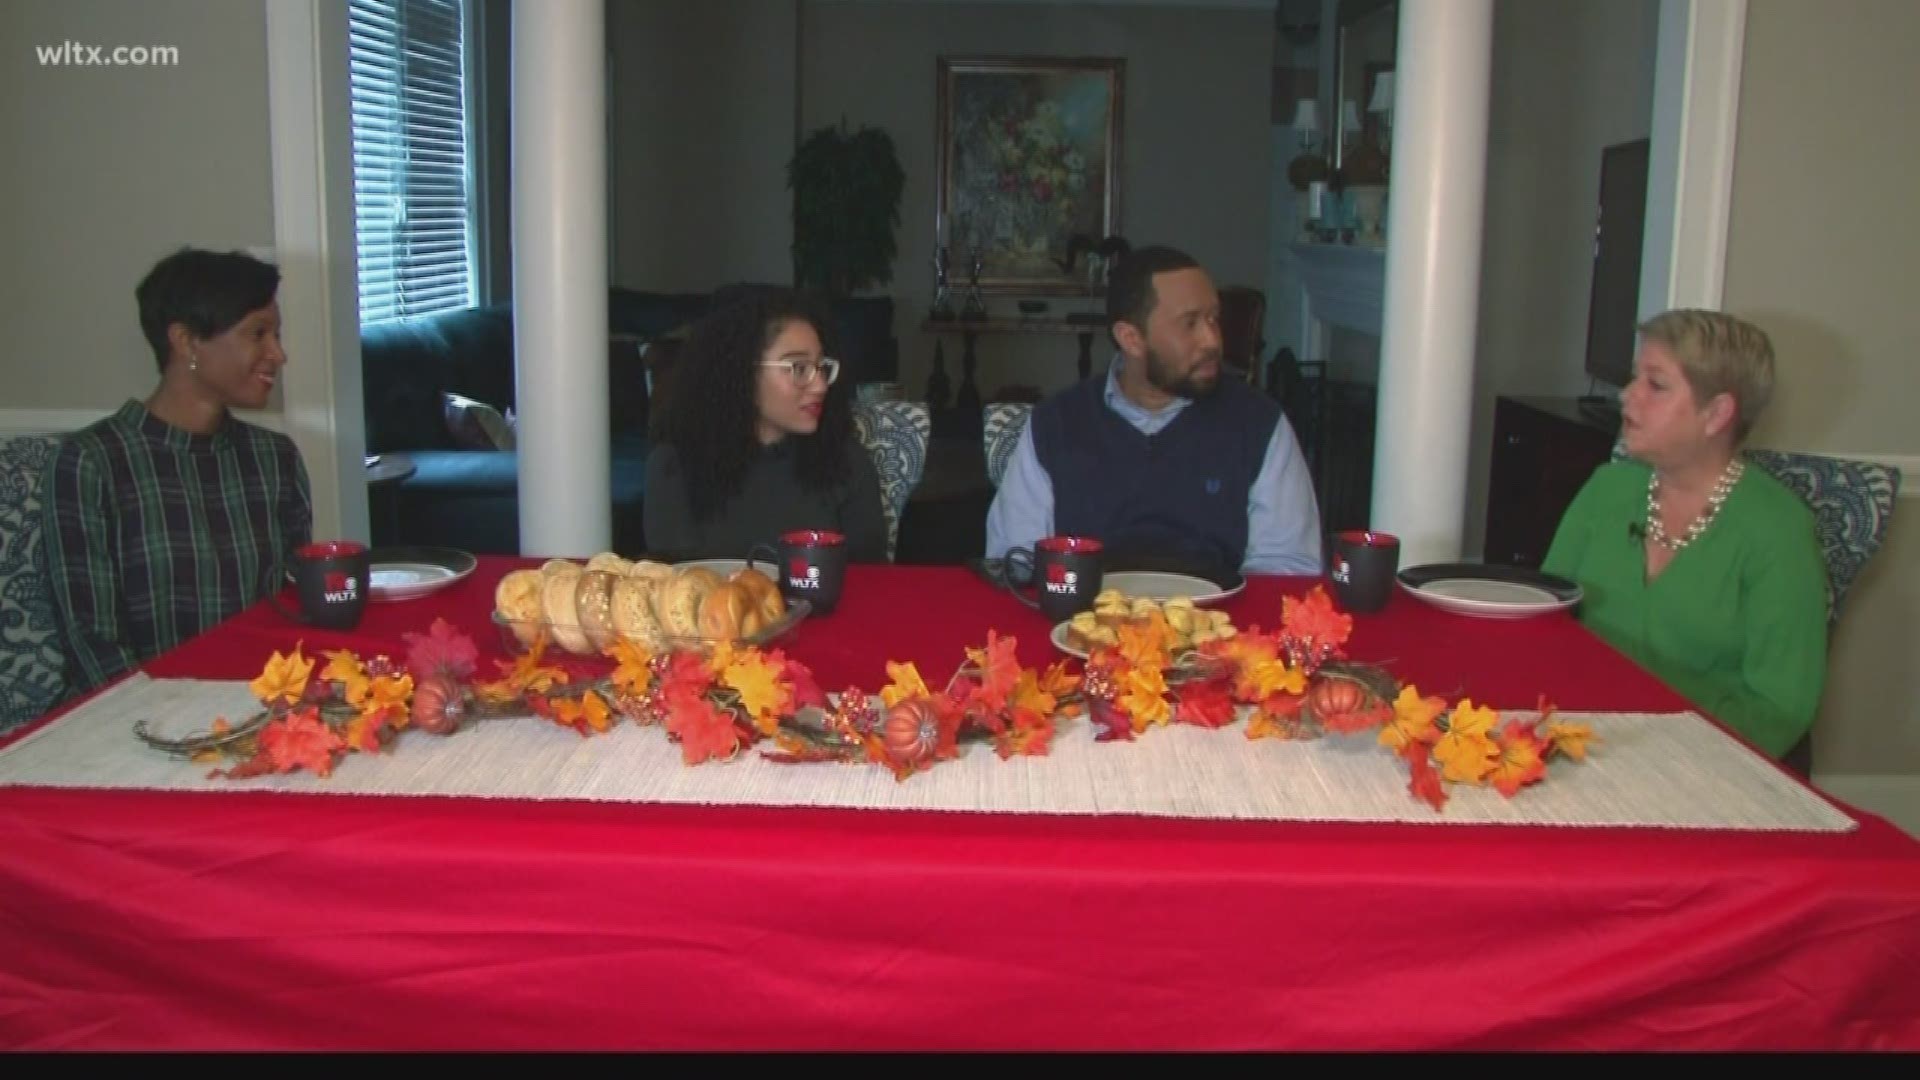 News19 sat down with two experts ahead of the holidays to offer ways to avoid conflict around the Thanksgiving dinner table.